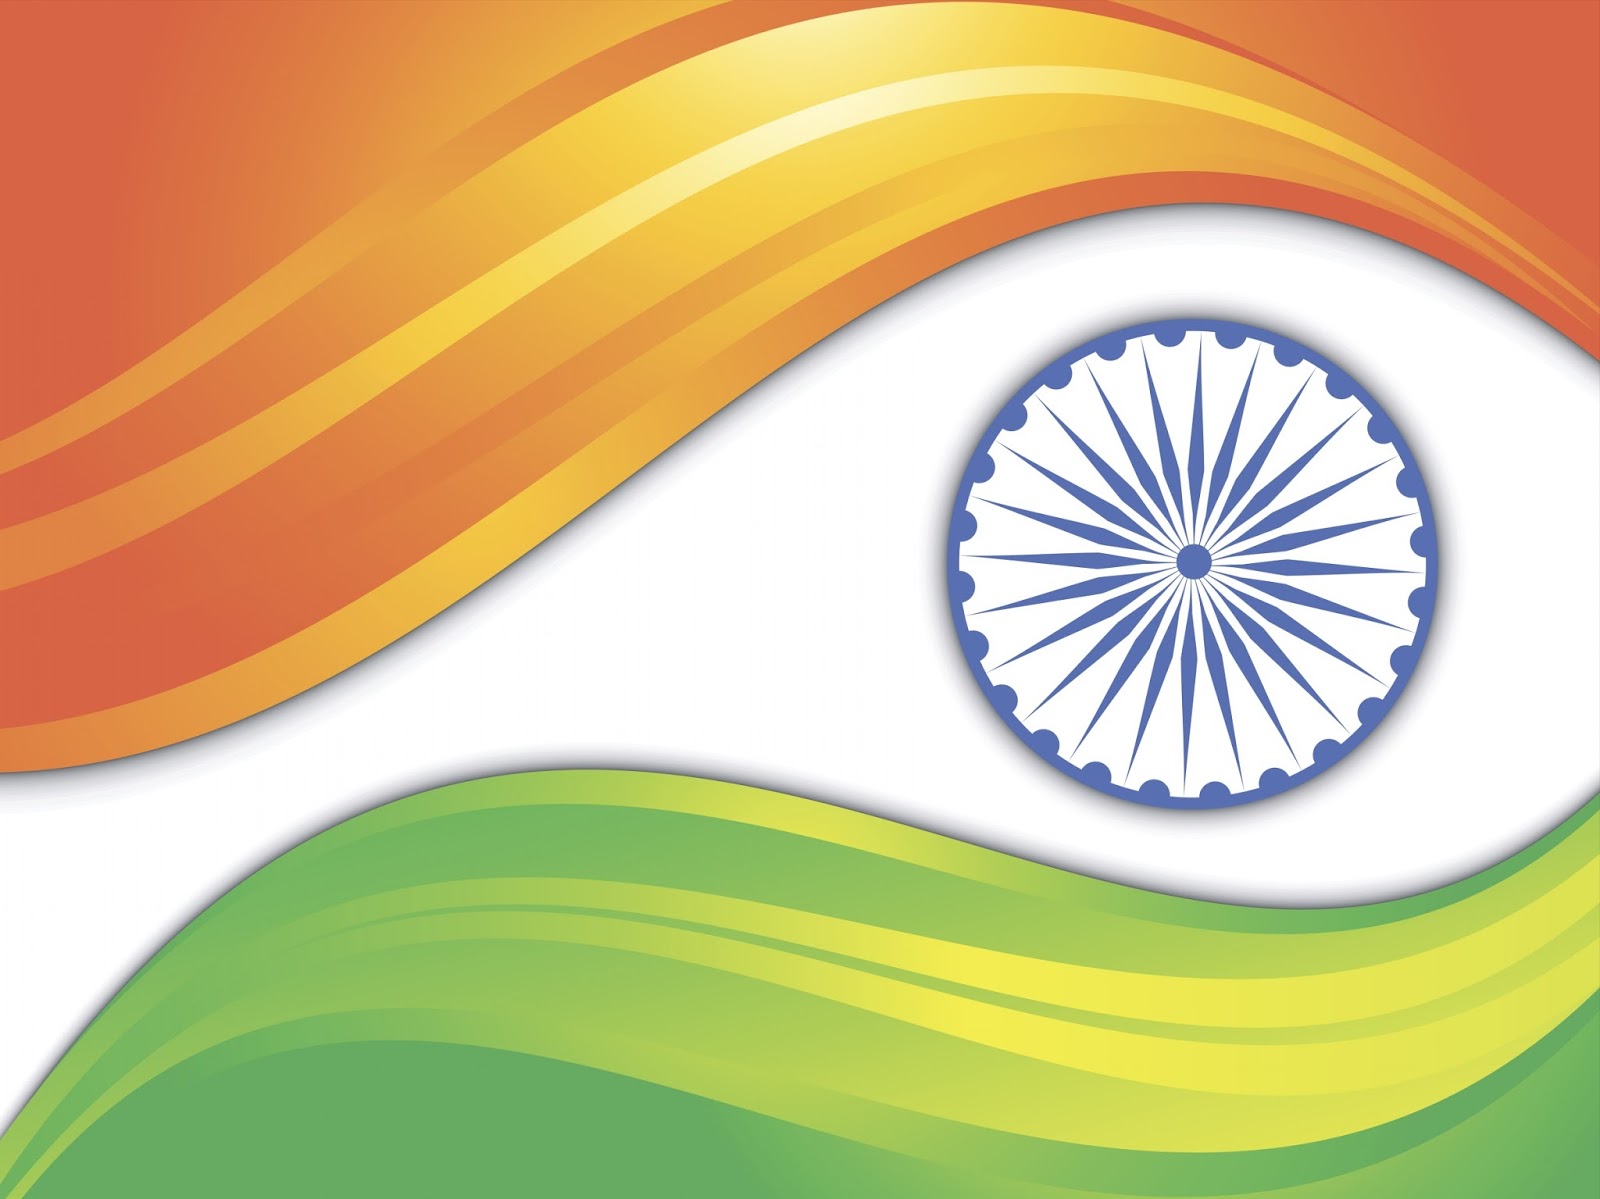 Independence Day SMS, Quotes, Messages, Wishes